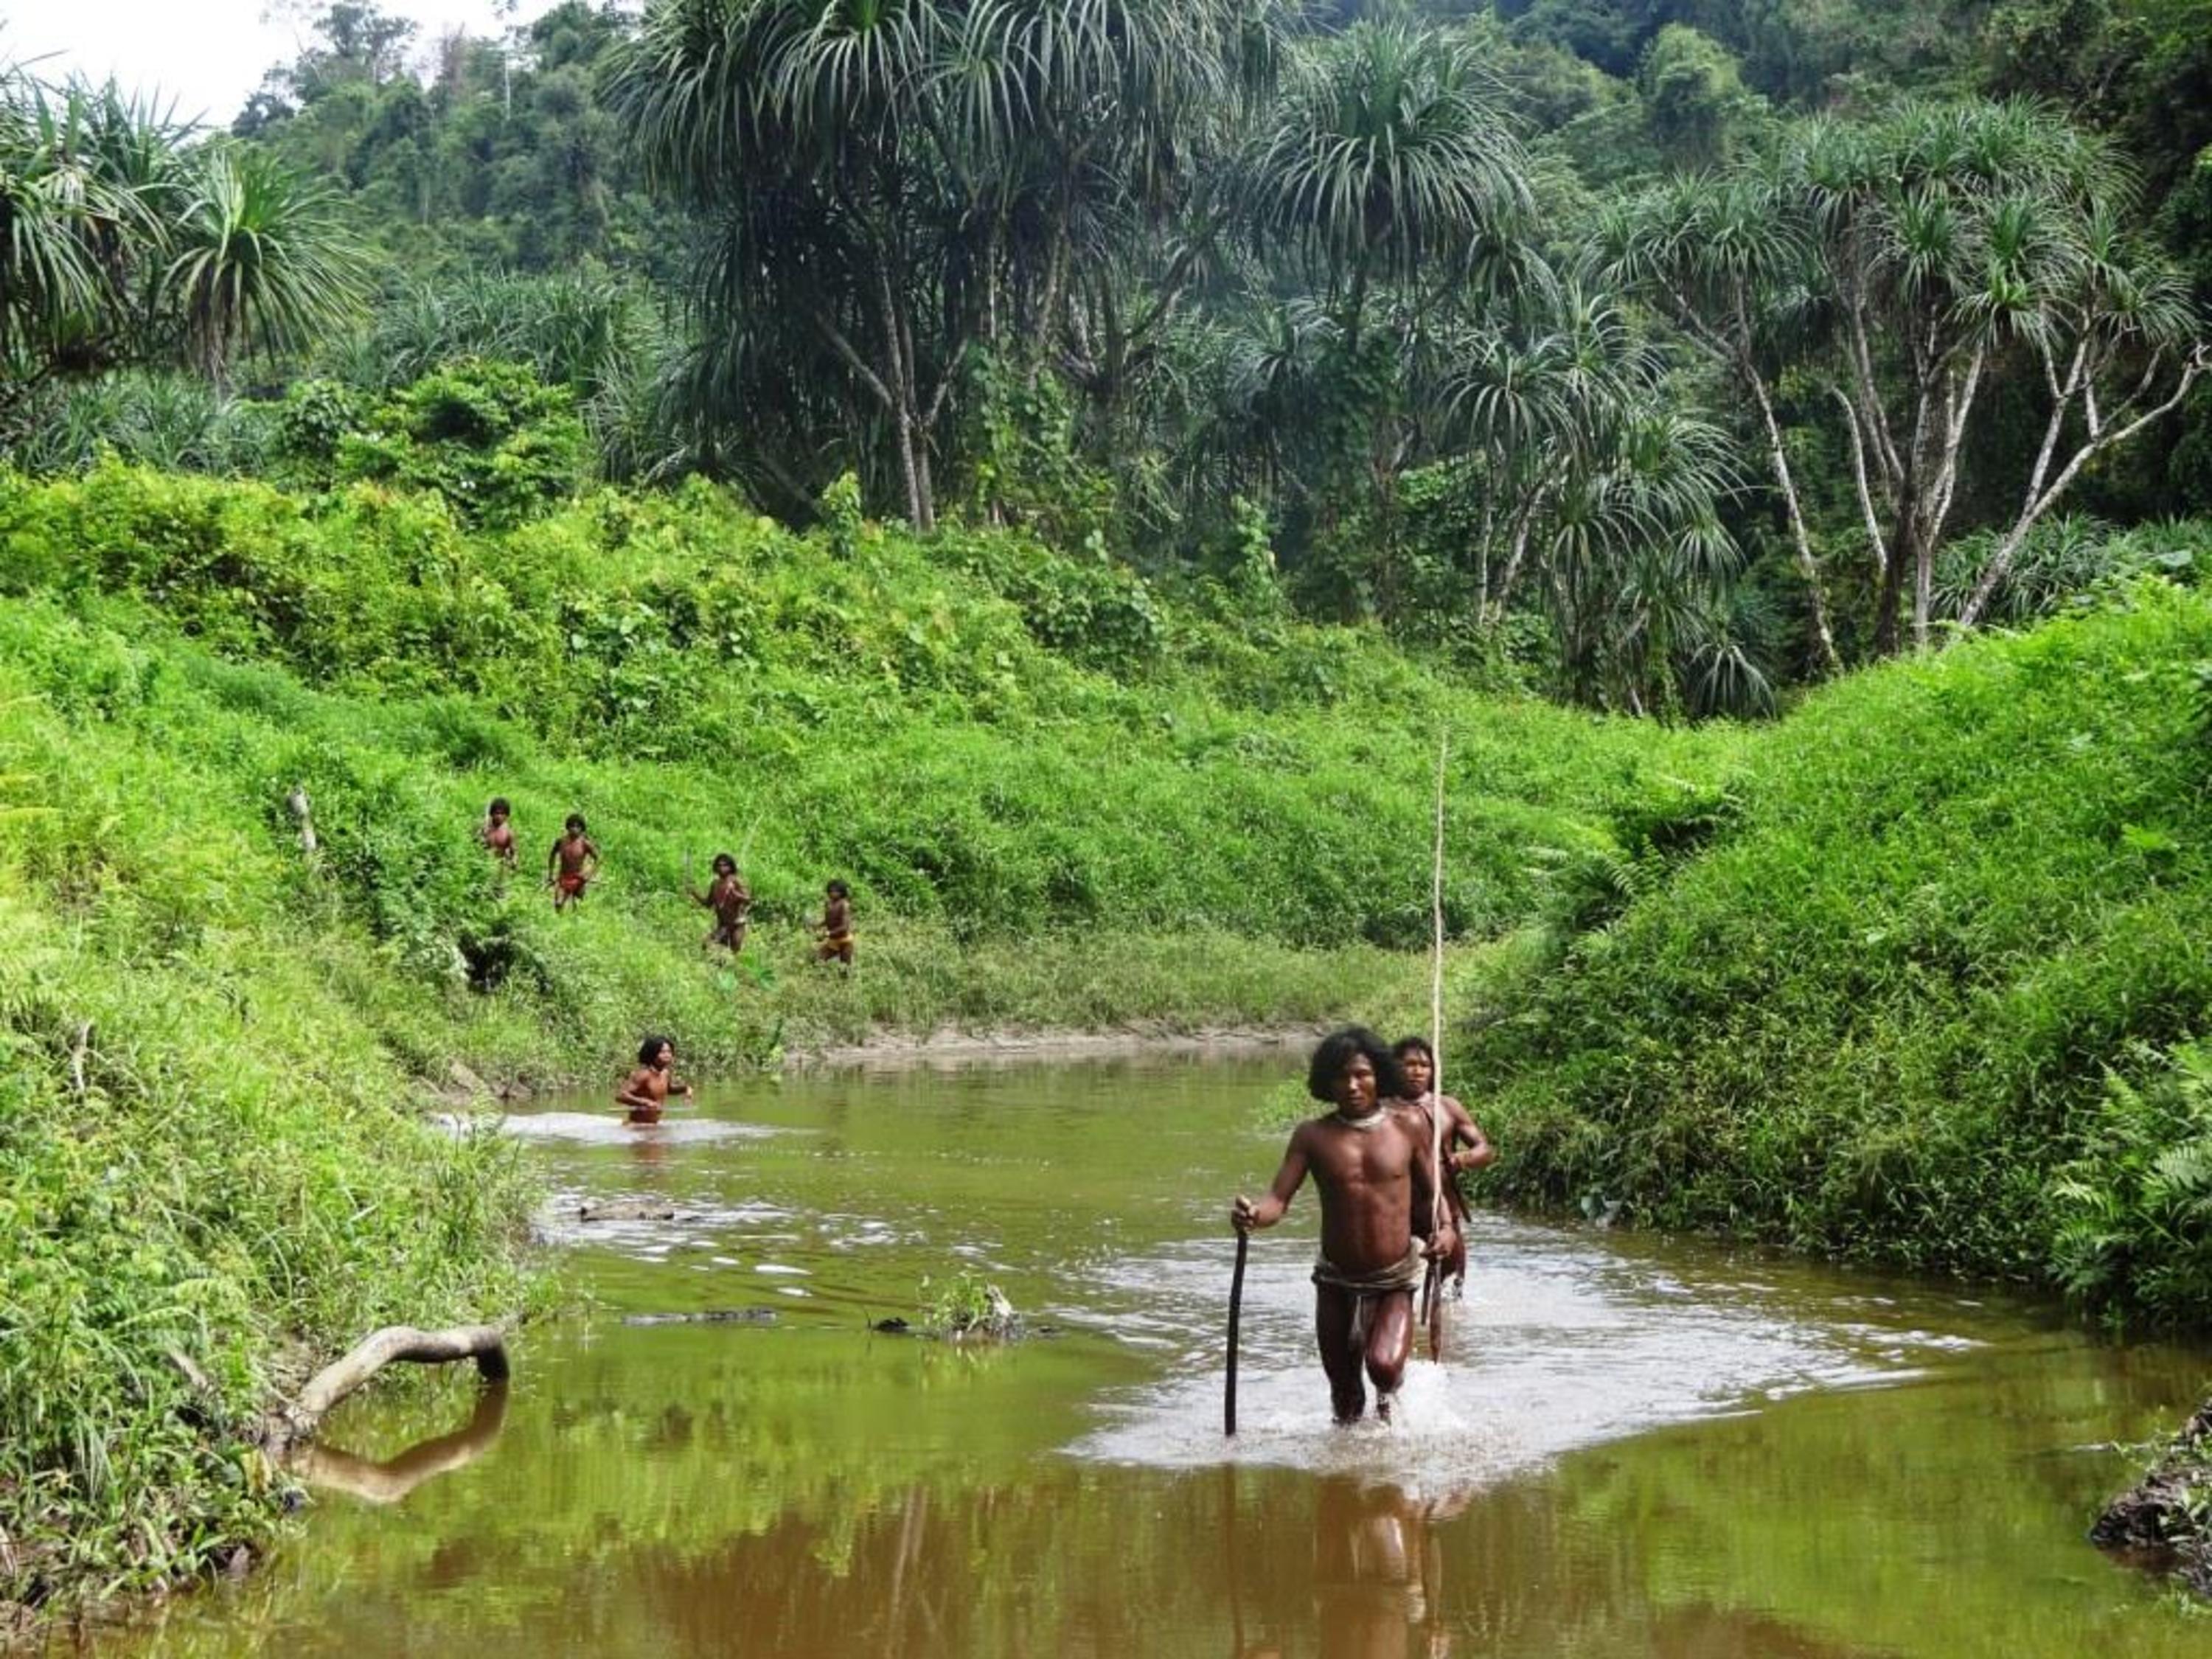 SHOMPEN: Uncontacted tribe in India faces genocide in the name of ‘mega-development’